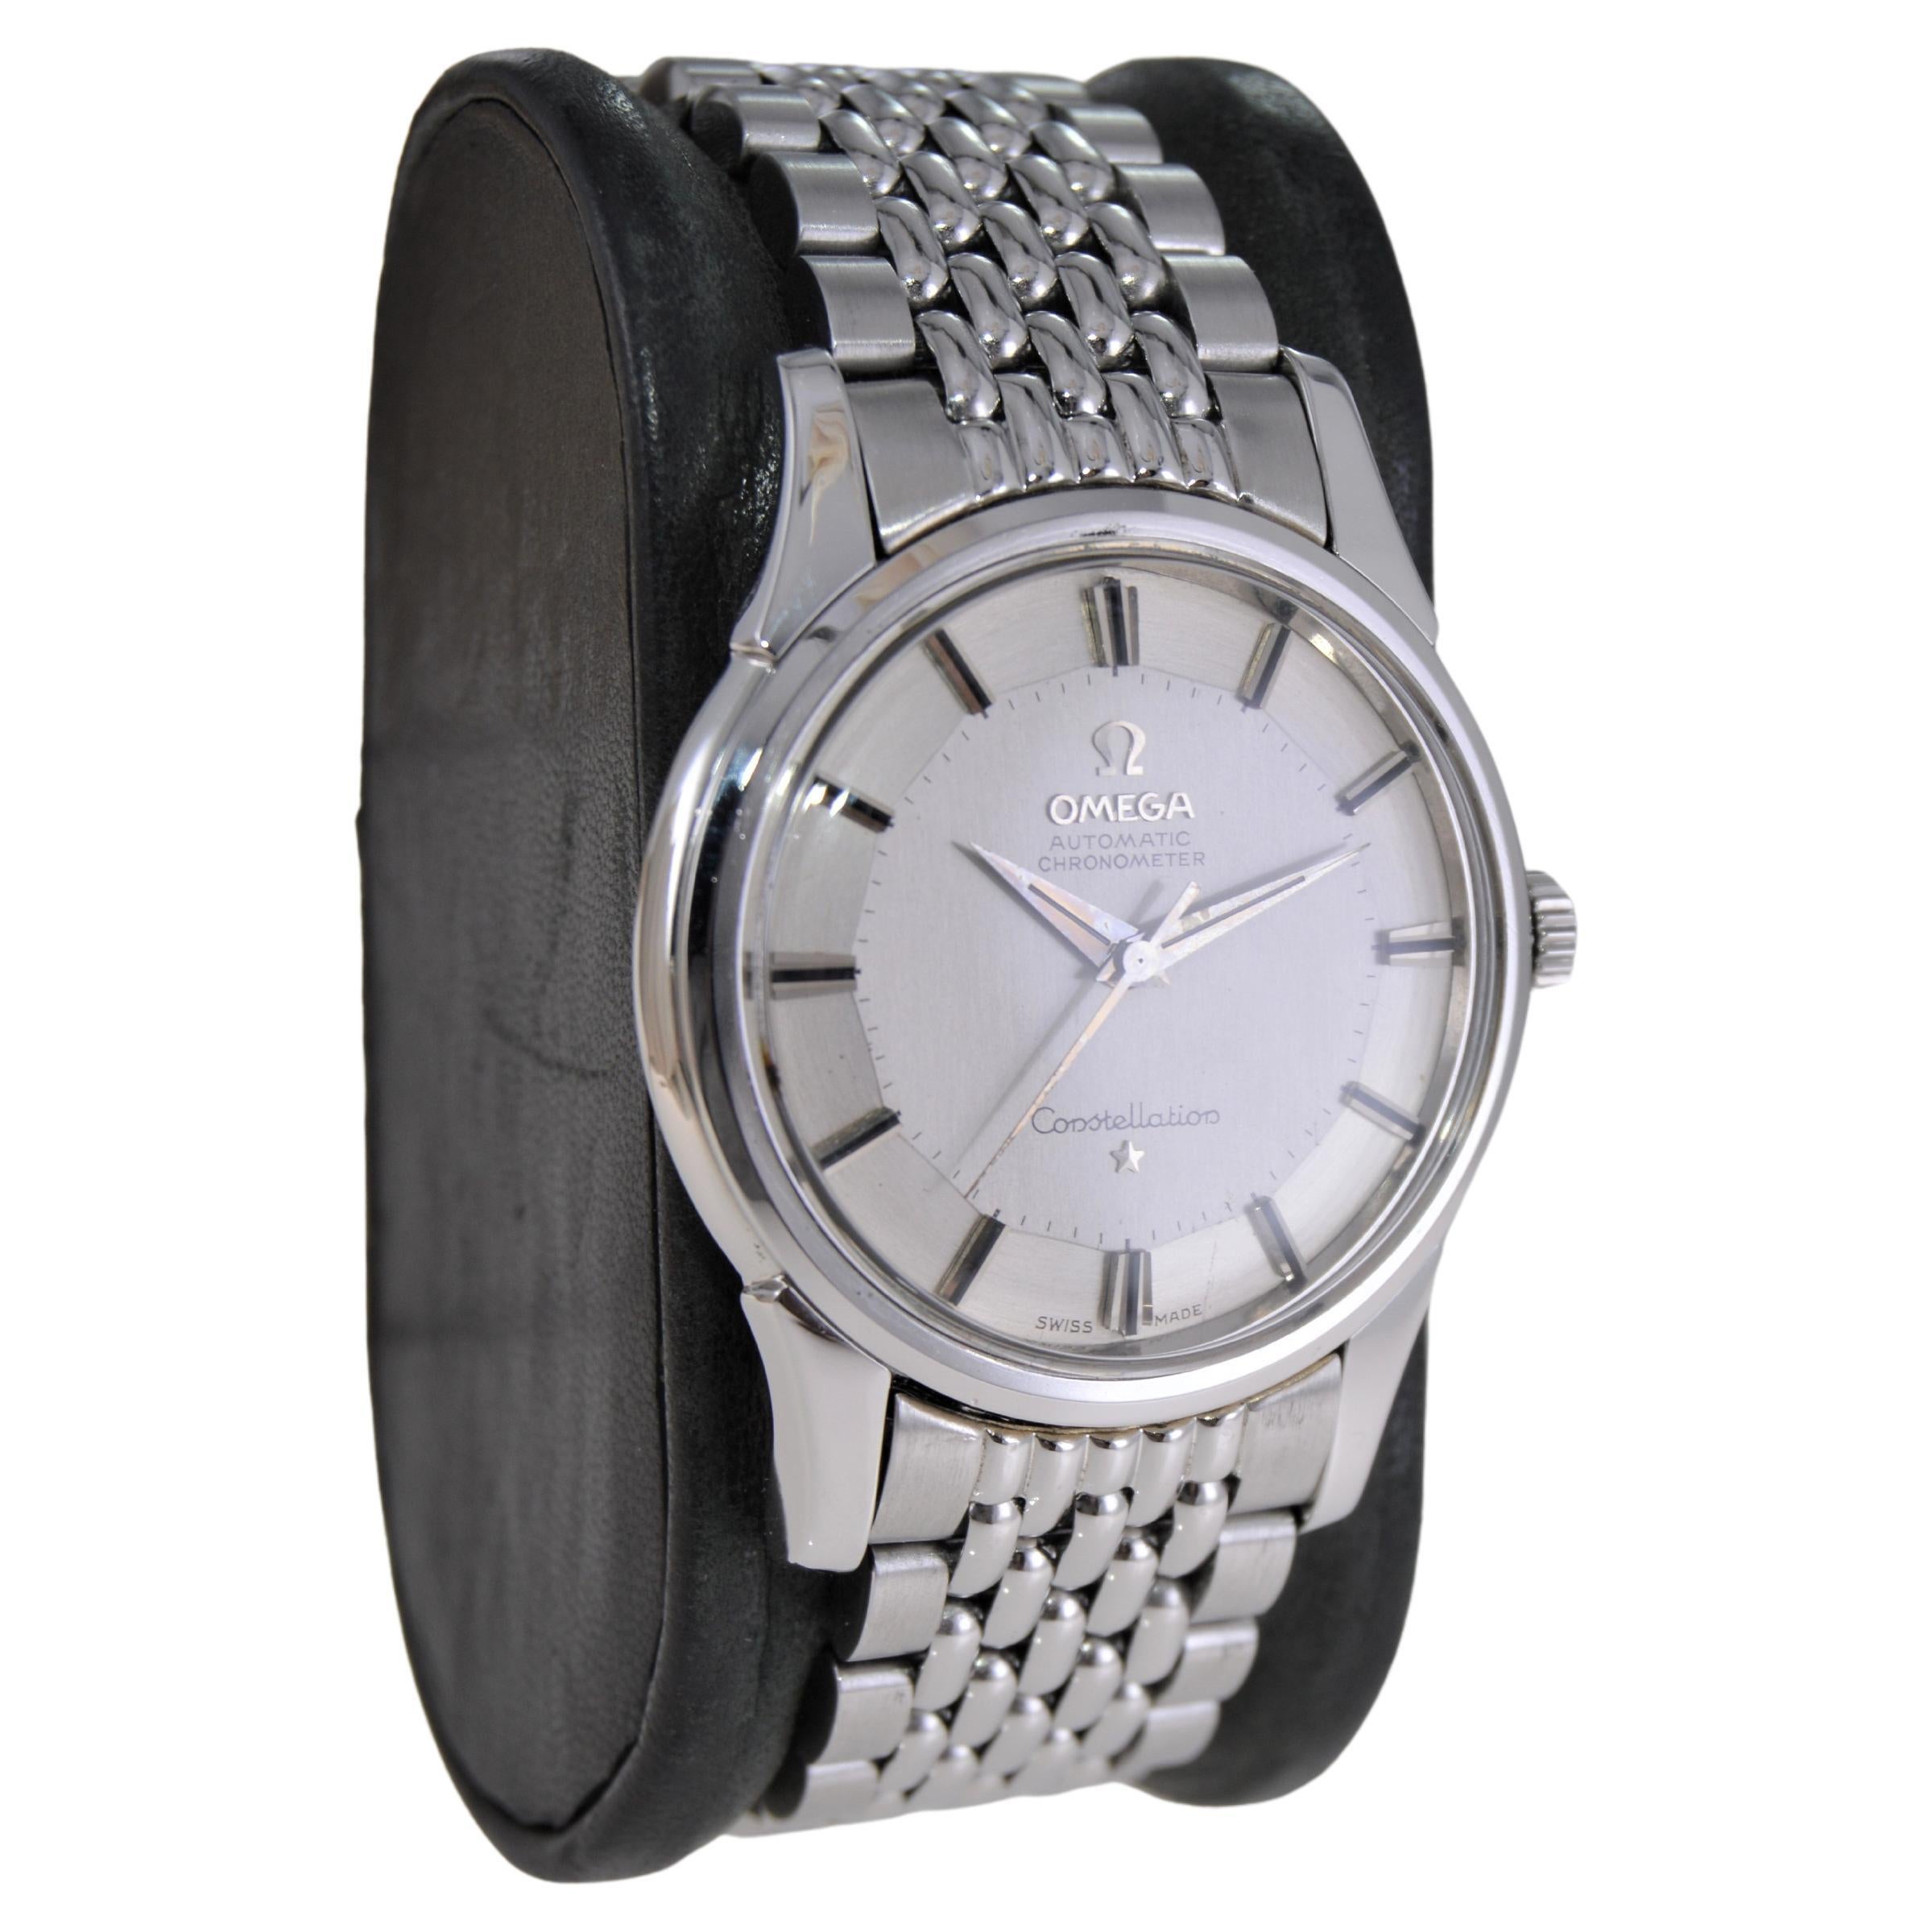 FACTORY / HOUSE: Omega Watch Company
STYLE / REFERENCE: Constellation
METAL / MATERIAL: Stainless Steel
CIRCA / YEAR: 1950's
DIMENSIONS / SIZE: 32mm Length X 44mm Diameter
MOVEMENT / CALIBER: Automatic Winding / 24 Jewels / Caliber 551
DIAL / HANDS: